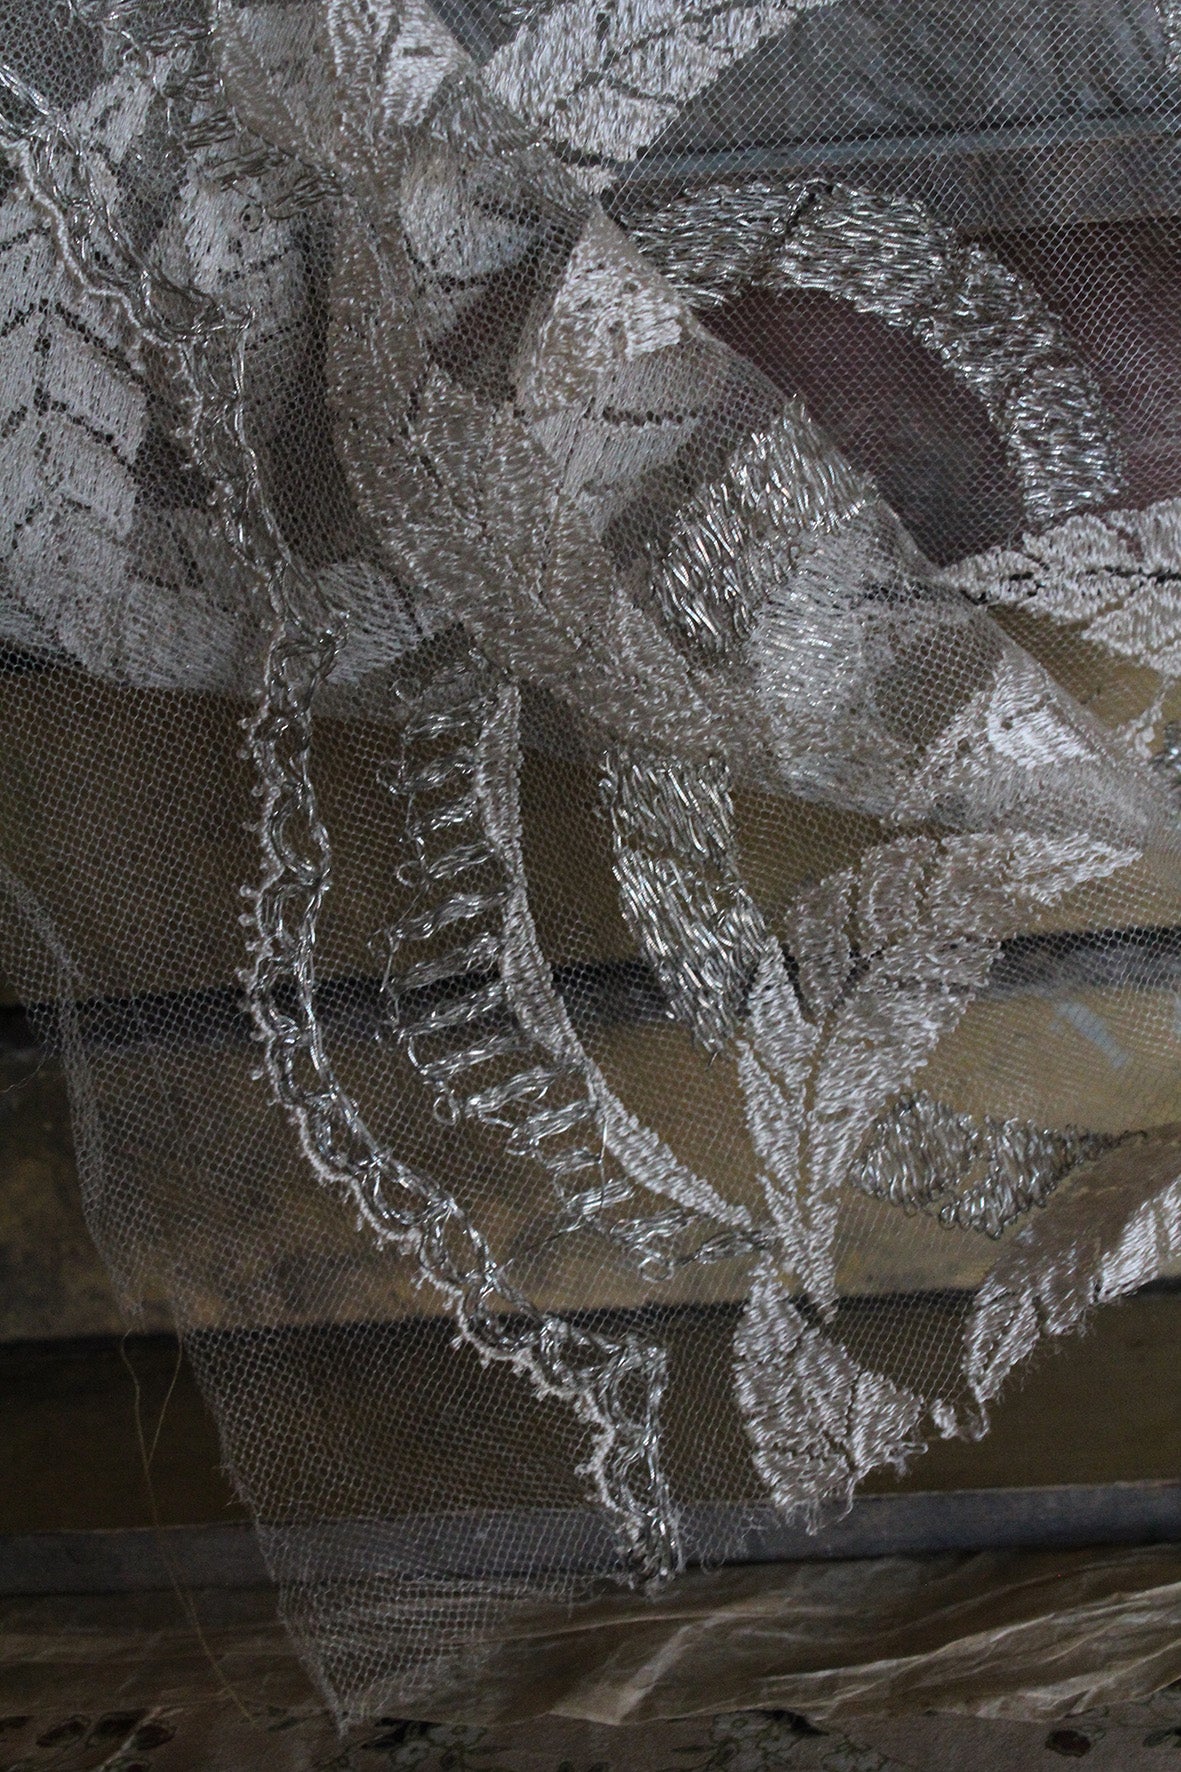 Antique Embroidered Floral Lace Sample with Fine Metallic Thread Details